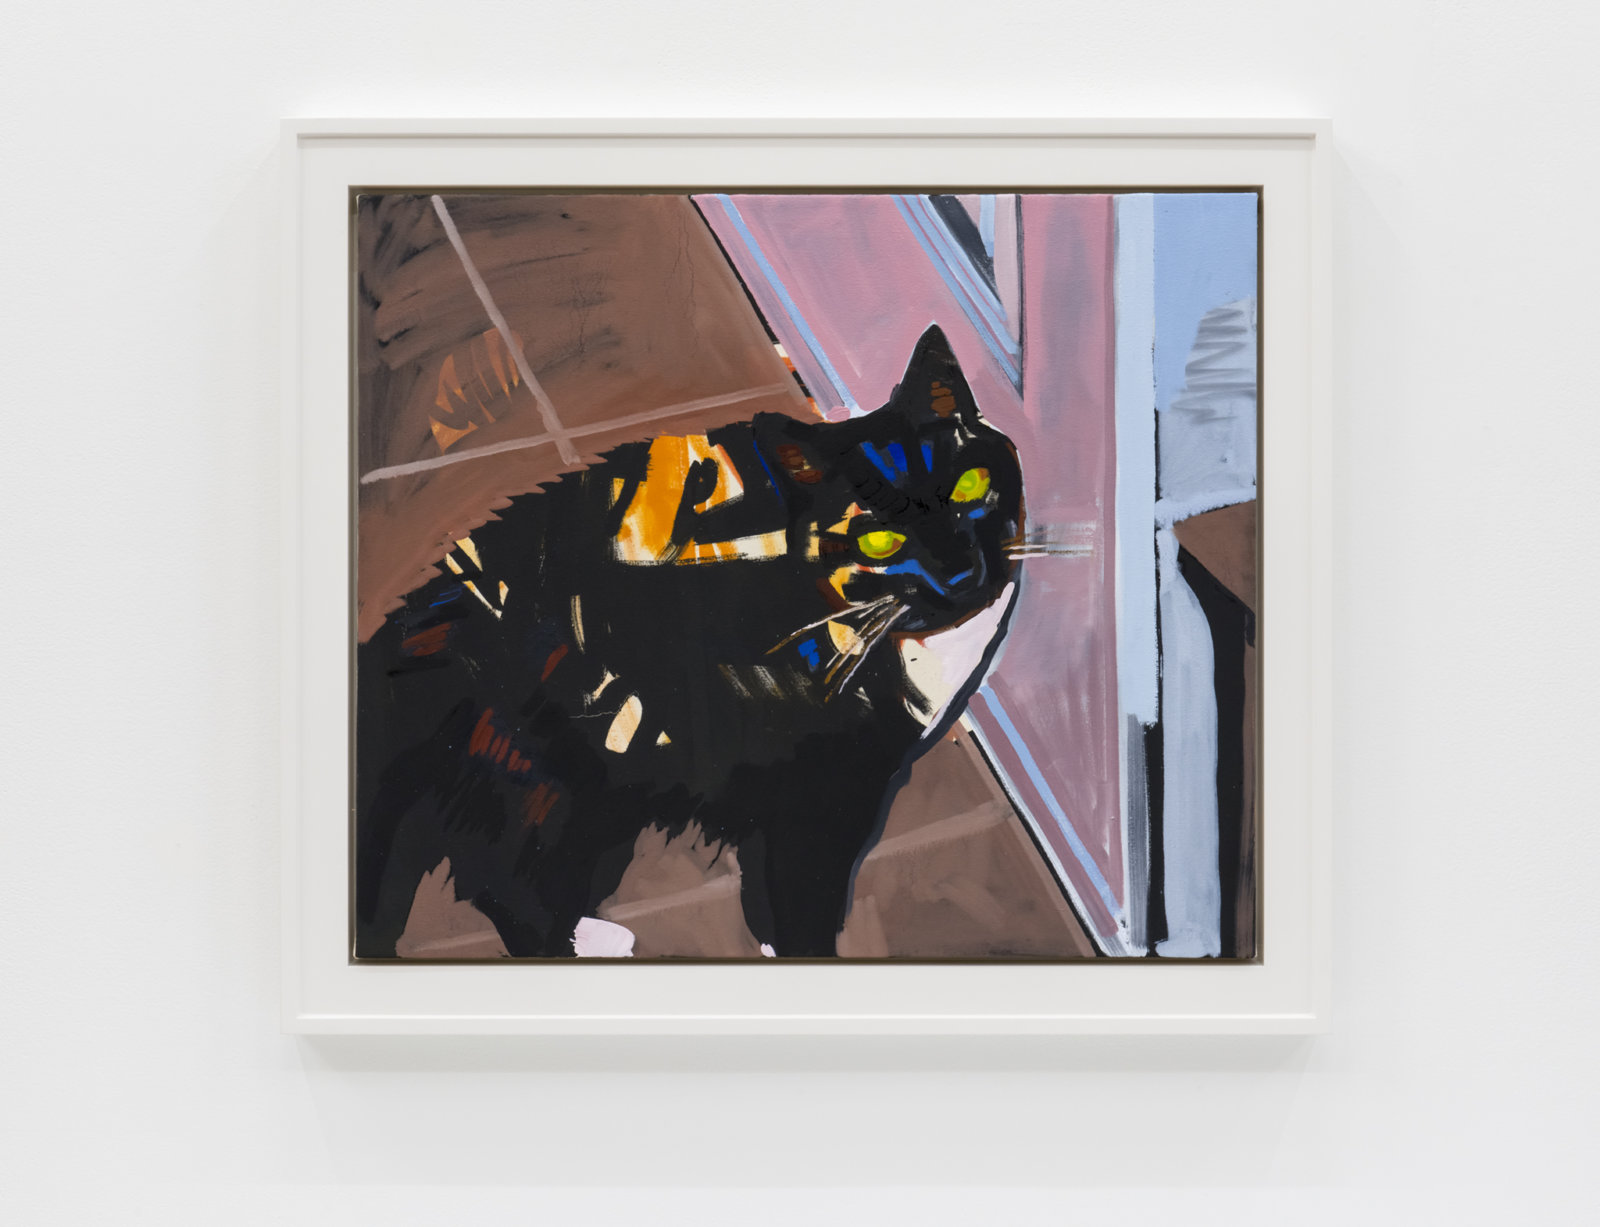 Damian Moppett, Black Cat Photograph, 2017, oil on canvas with painted wood frame, 28 x 32 in. (70 x 80 cm)